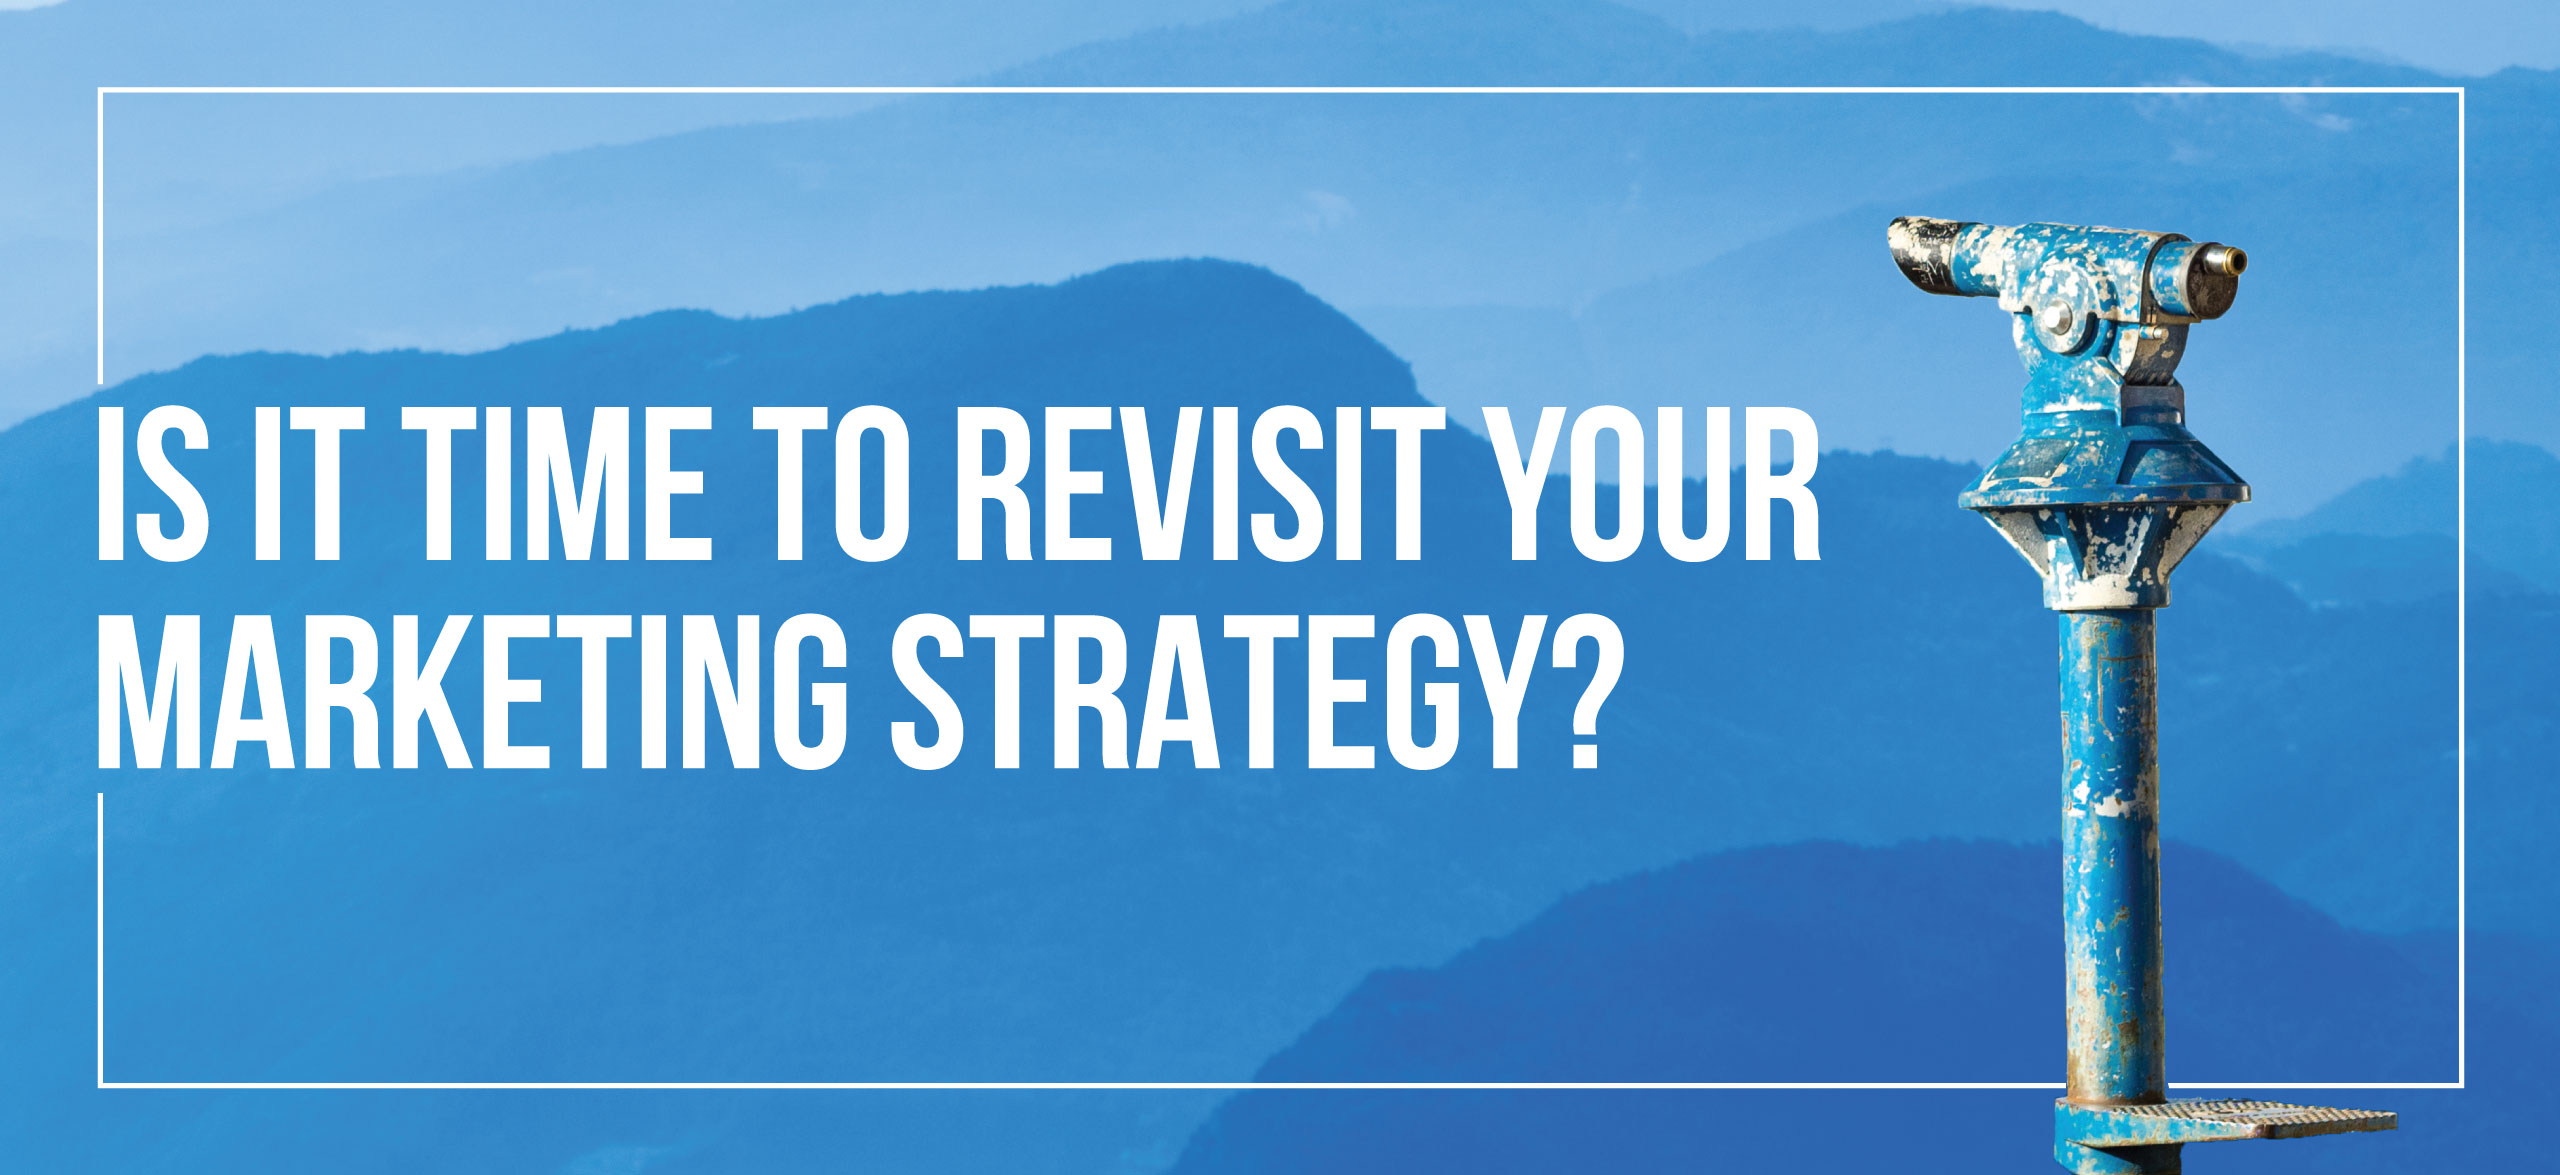 Revisit Your Marketing Strategy